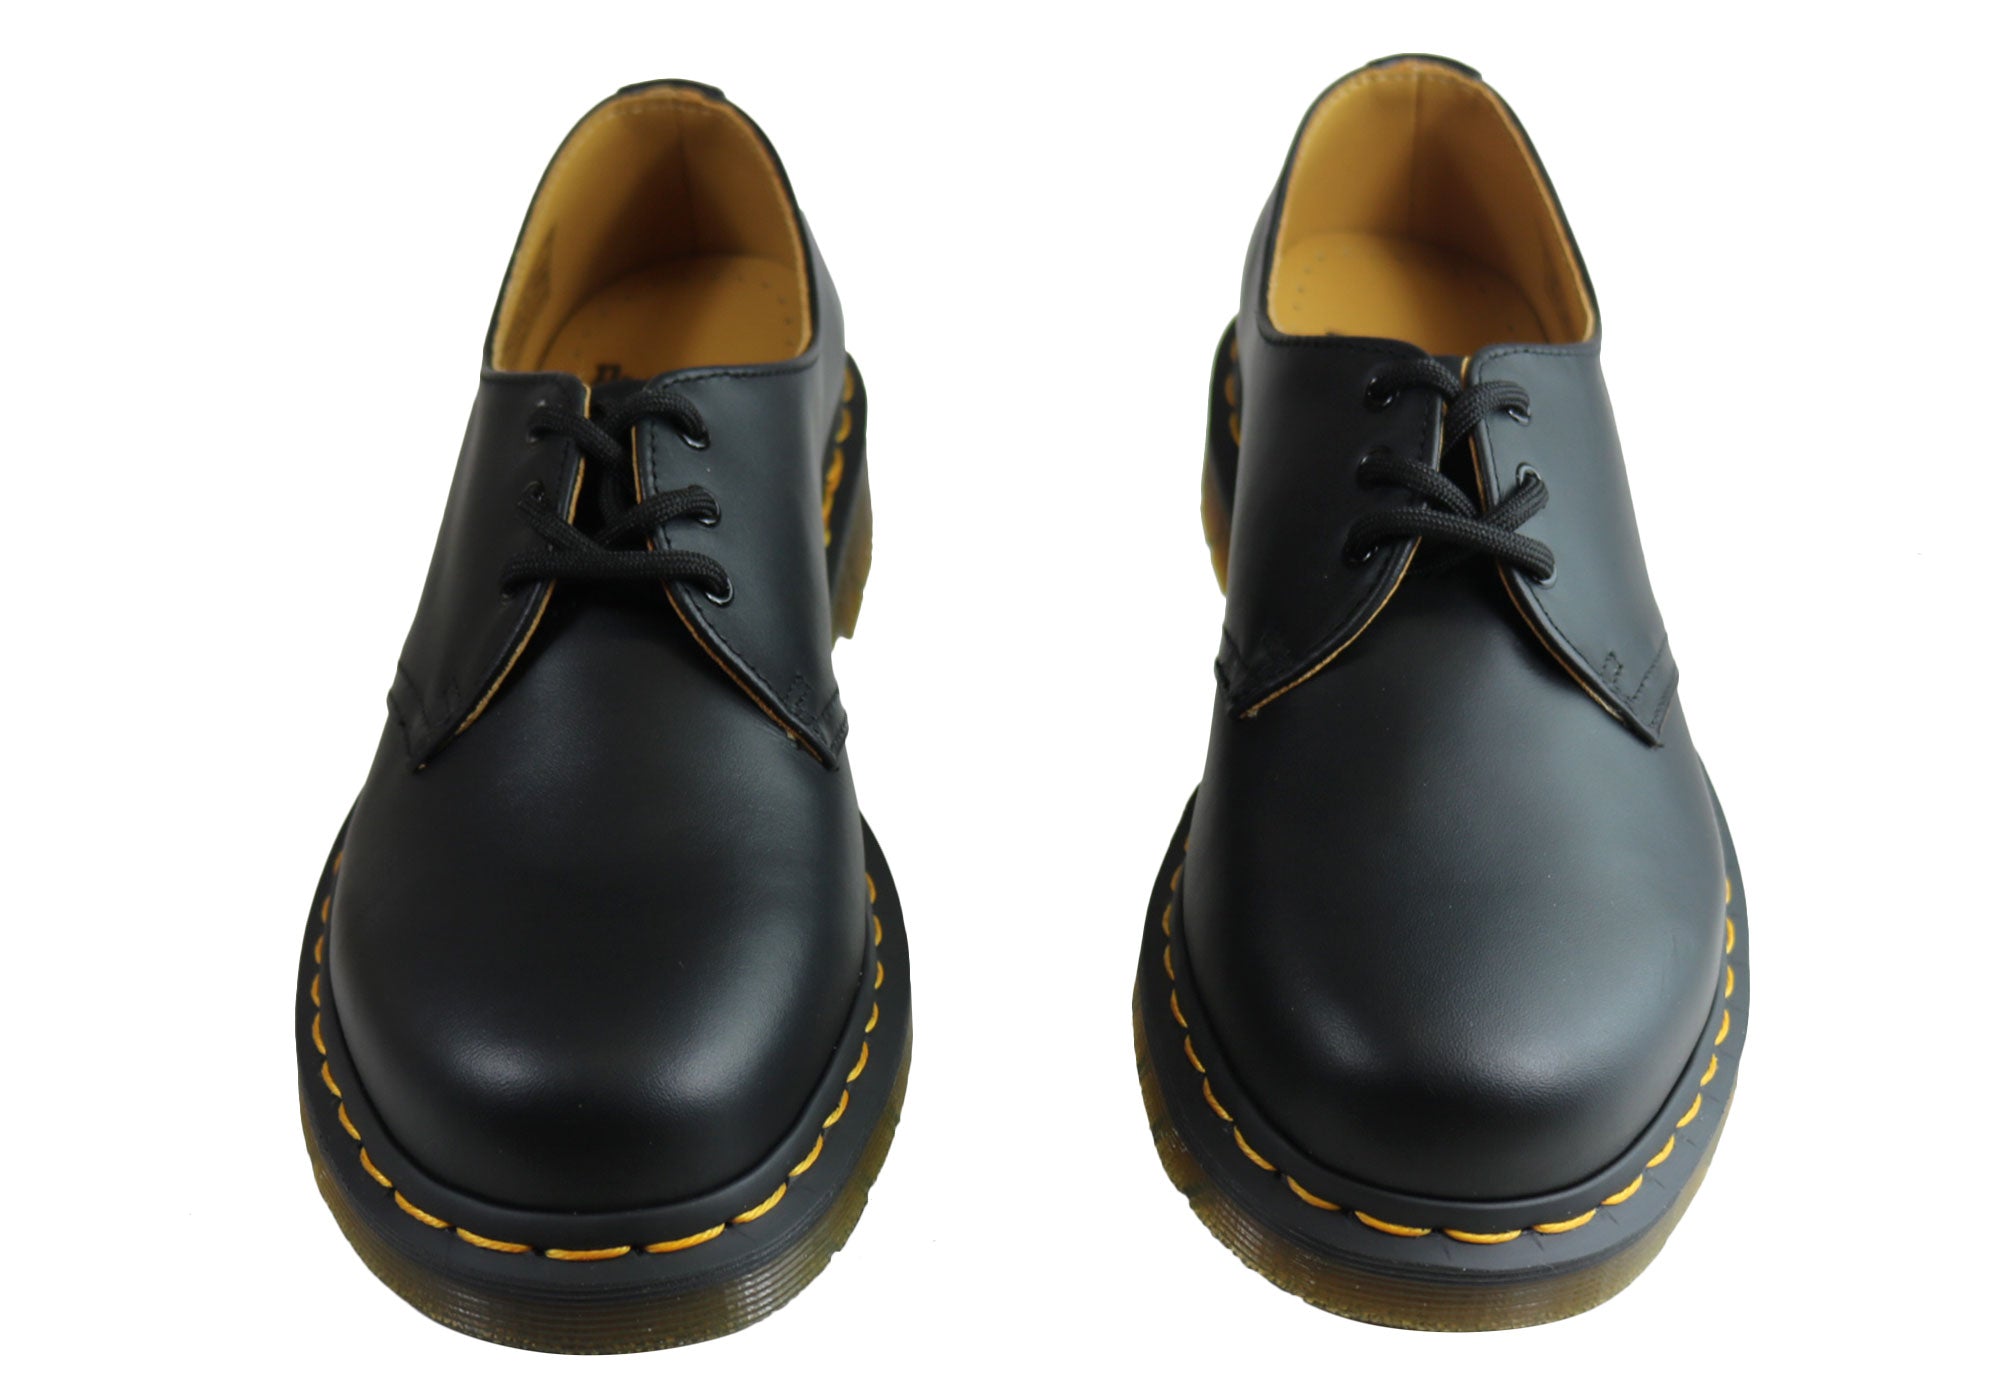 Dr Martens 1461 Black Nappa Leather Shoes | Brand House Direct